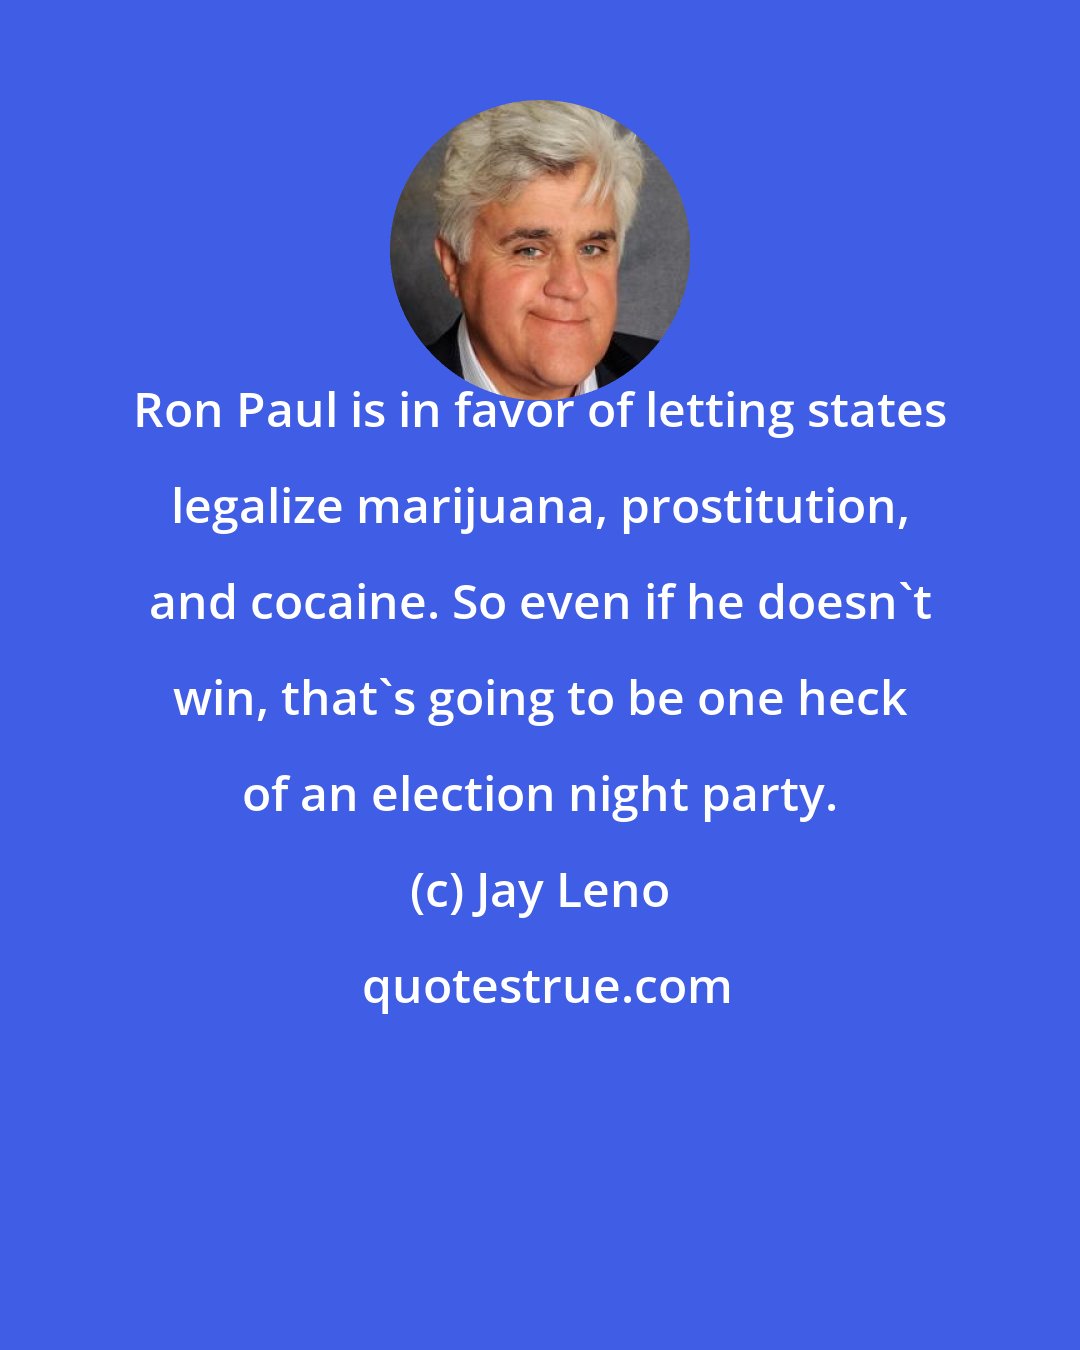 Jay Leno: Ron Paul is in favor of letting states legalize marijuana, prostitution, and cocaine. So even if he doesn't win, that's going to be one heck of an election night party.